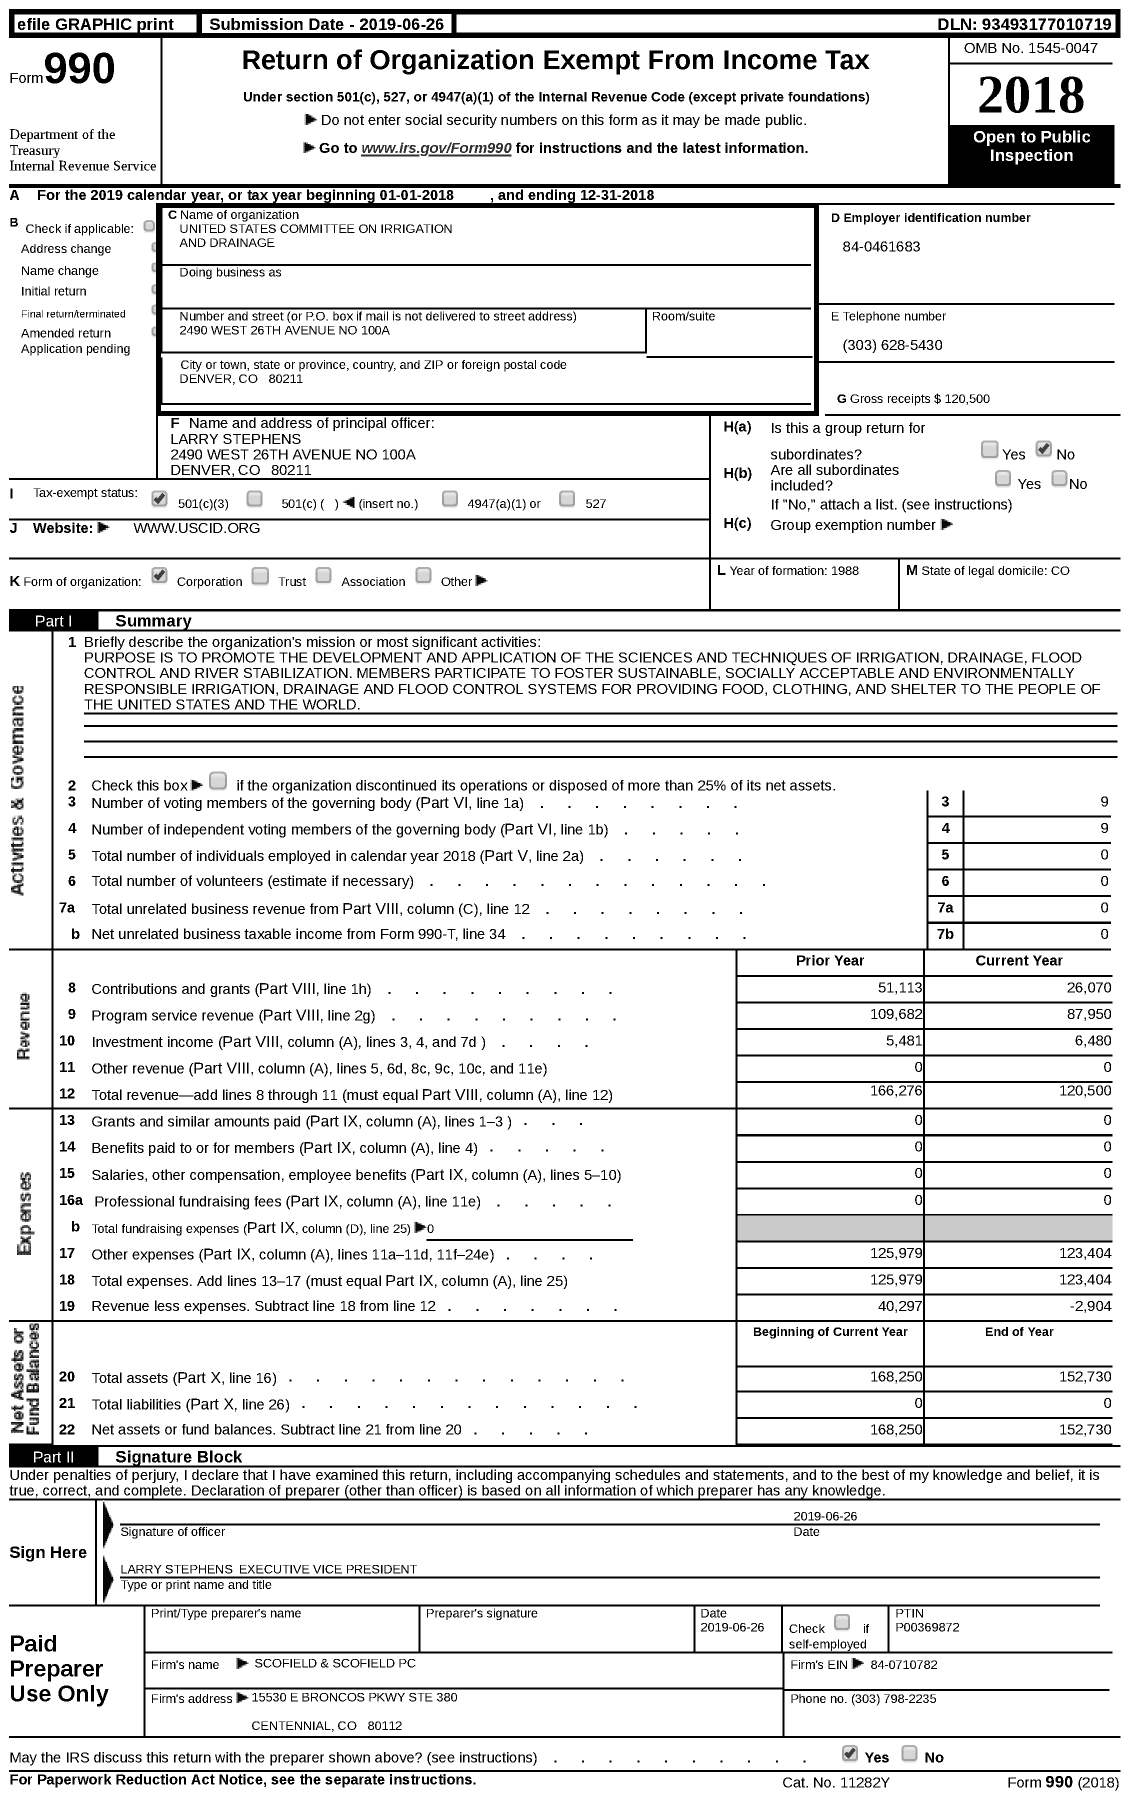 Image of first page of 2018 Form 990 for United States Committee on Irrigation and Drainage